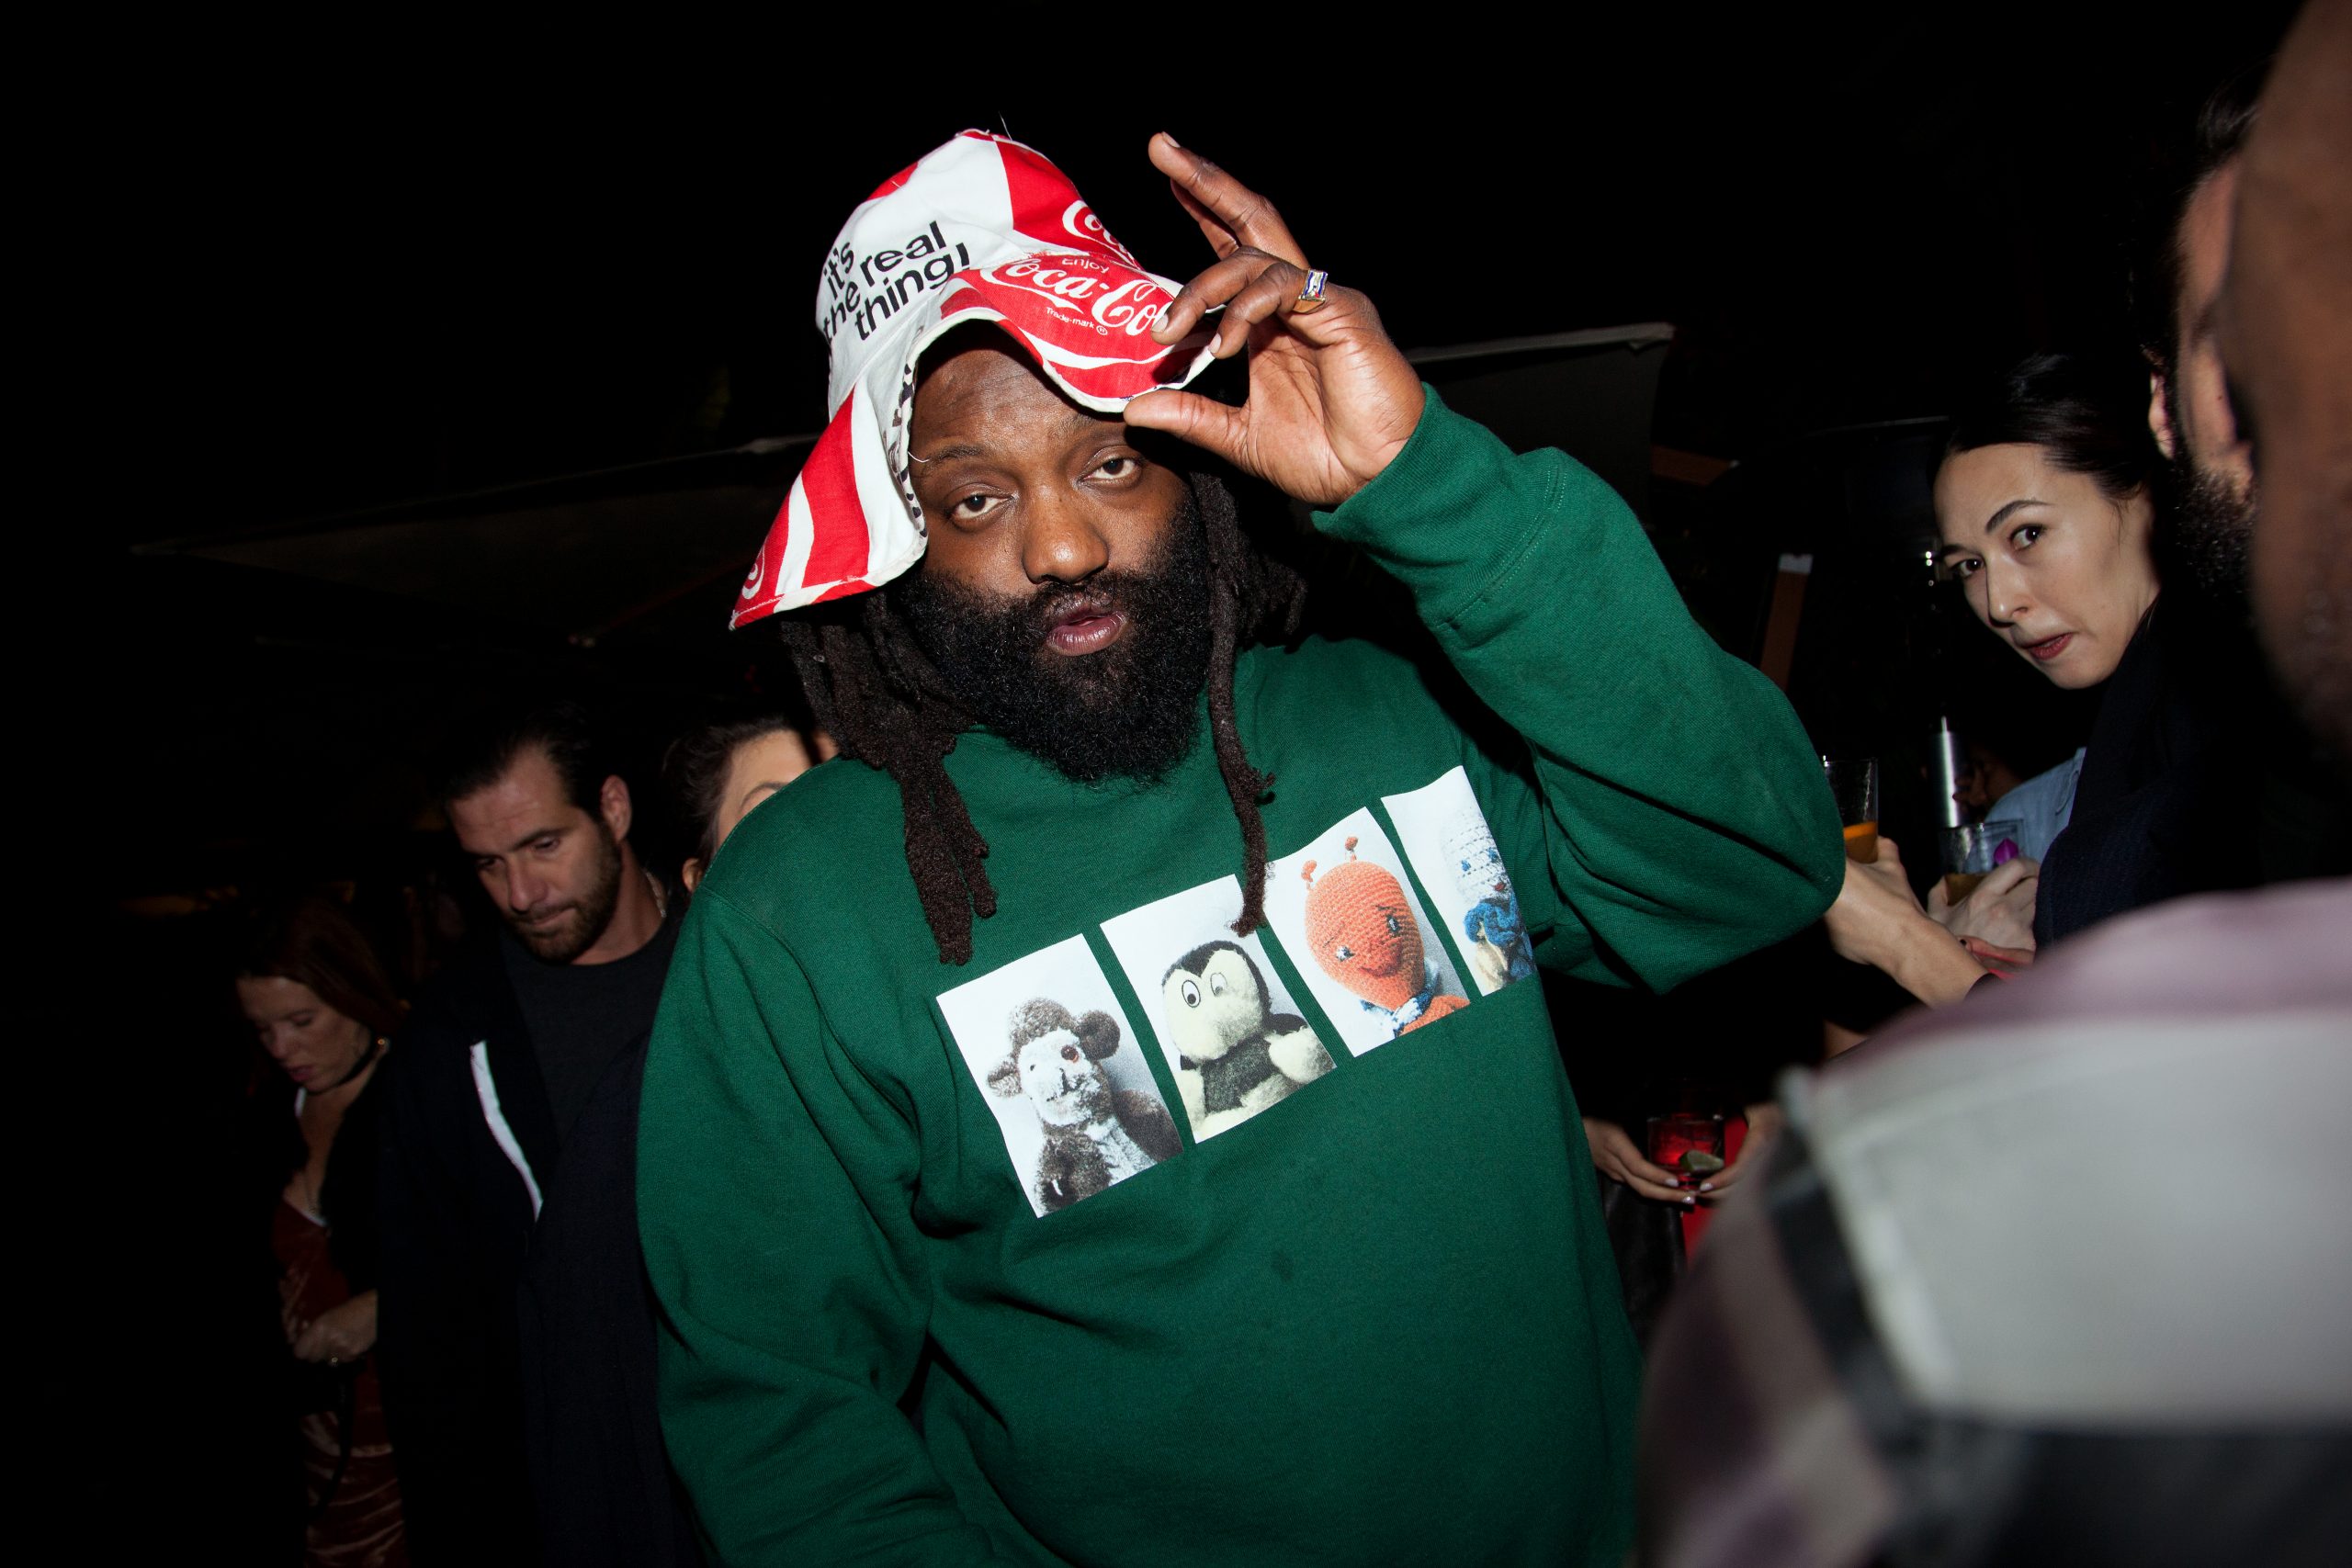 Supreme Creative Director Exits, Citing Systematic Racism